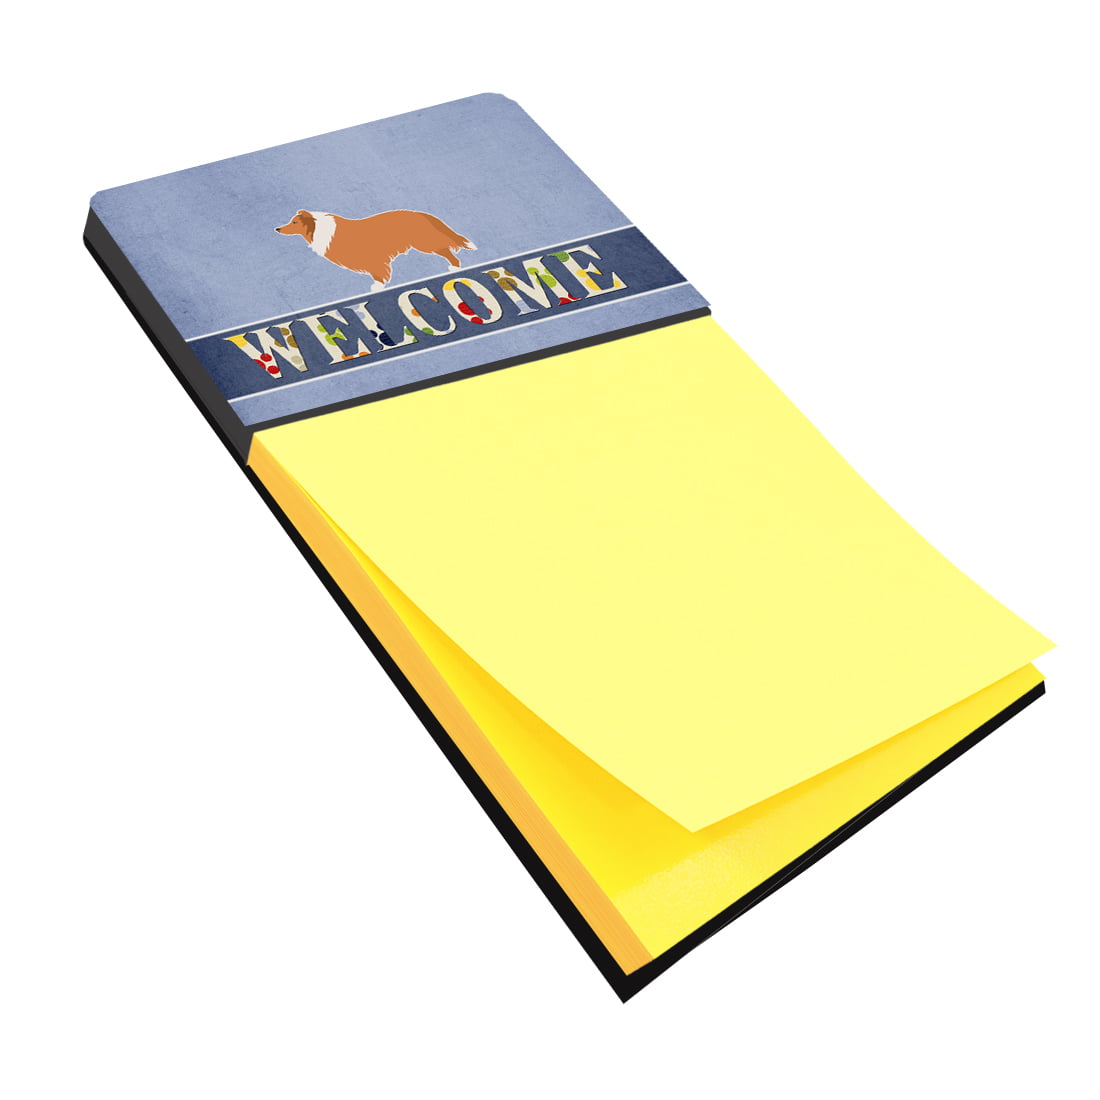 Bb5520sn Collie Welcome Sticky Note Holder